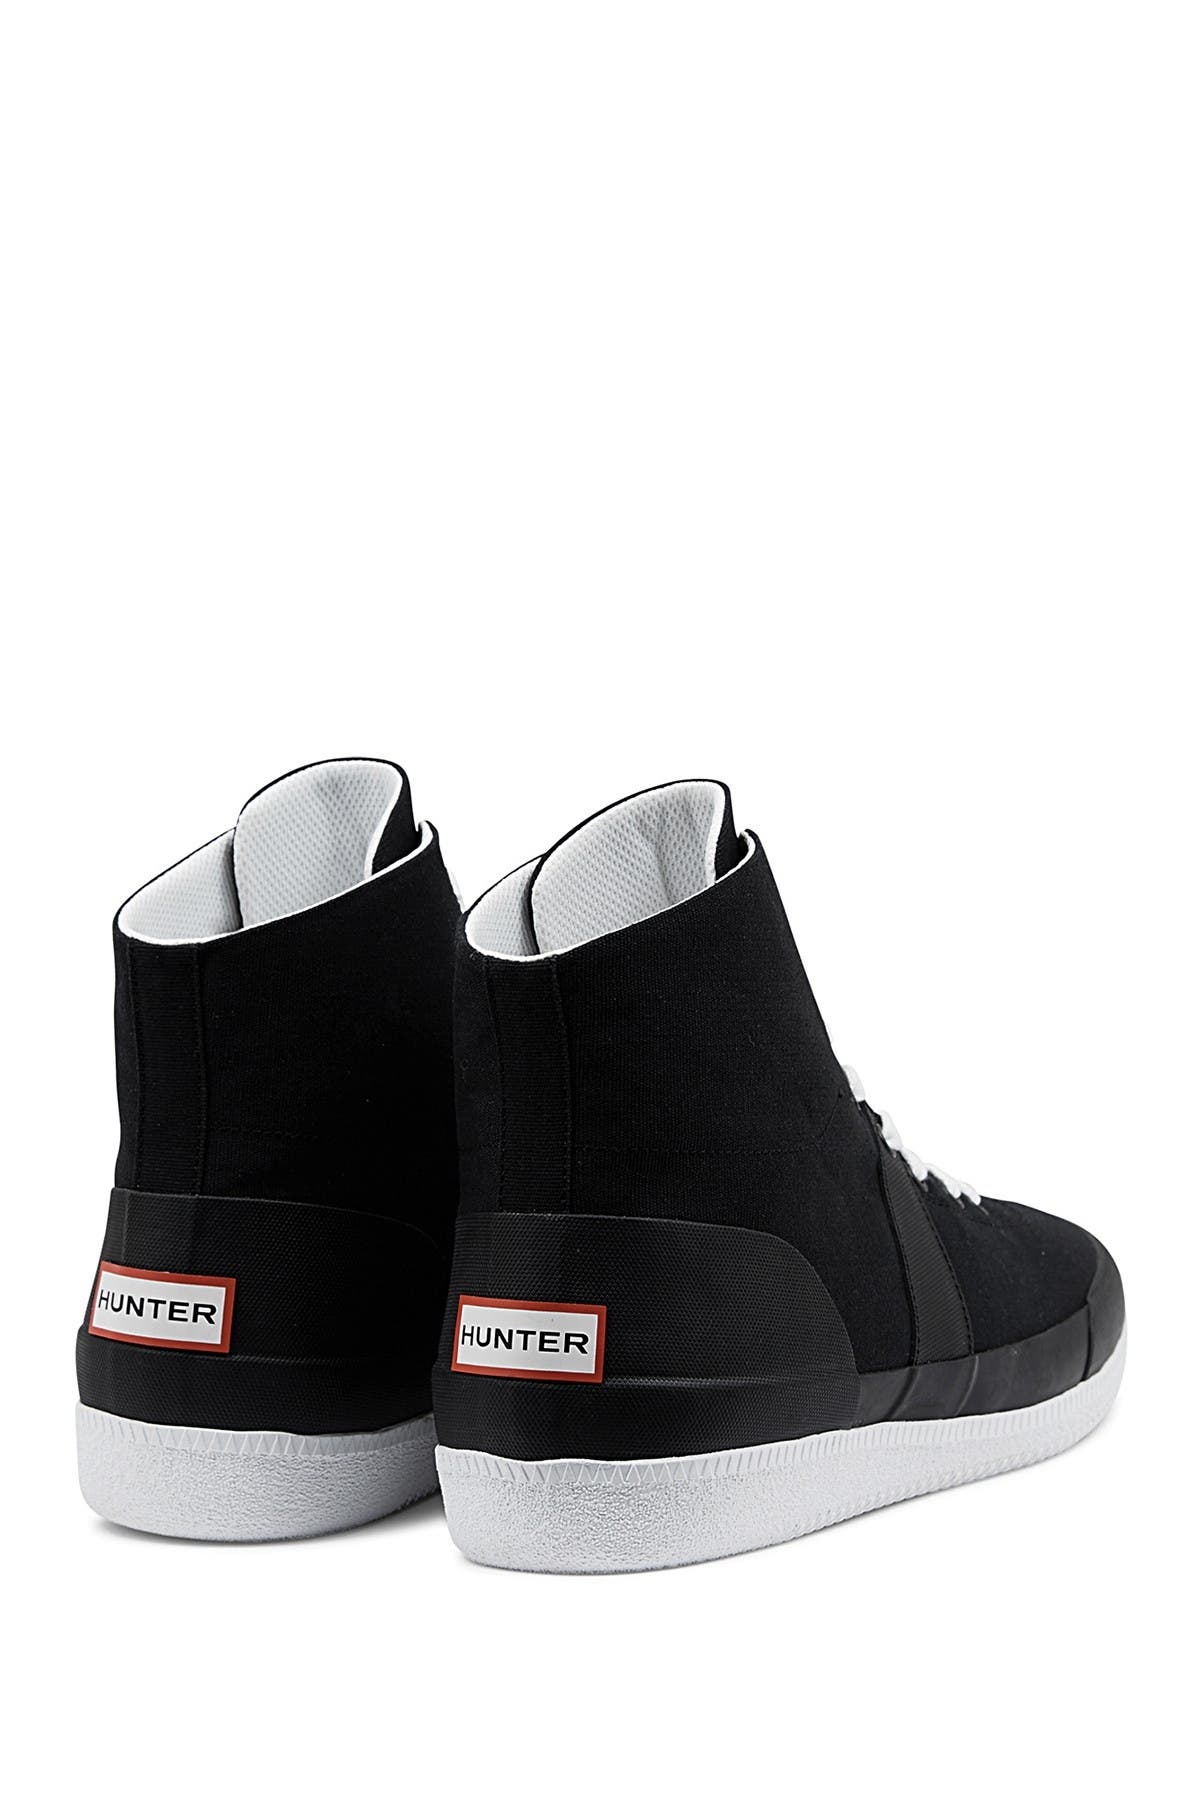 hunter canvas sneakers